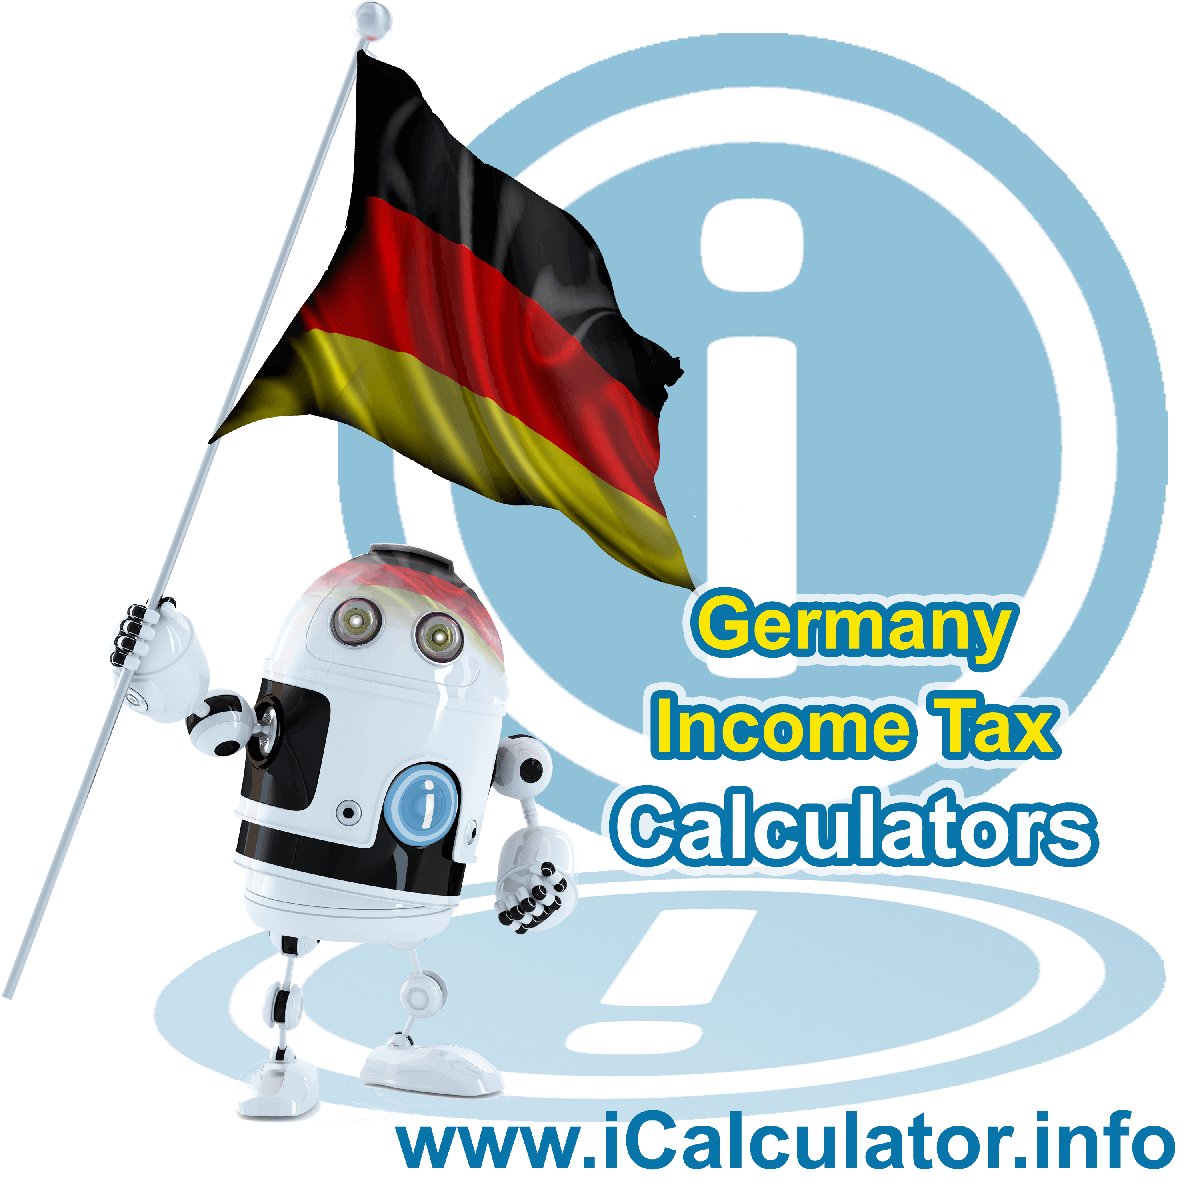 German IncomeTax Calculator. This image provides details of how to calculate income tax in Germany using a calculator and notepad. By using the tax rates and personal income tax formula, the German Tax Calculator provides a true calculation of the amount of taxes and other deductins including church tax, medical insurance, social security and other payroll related deductions in Germany